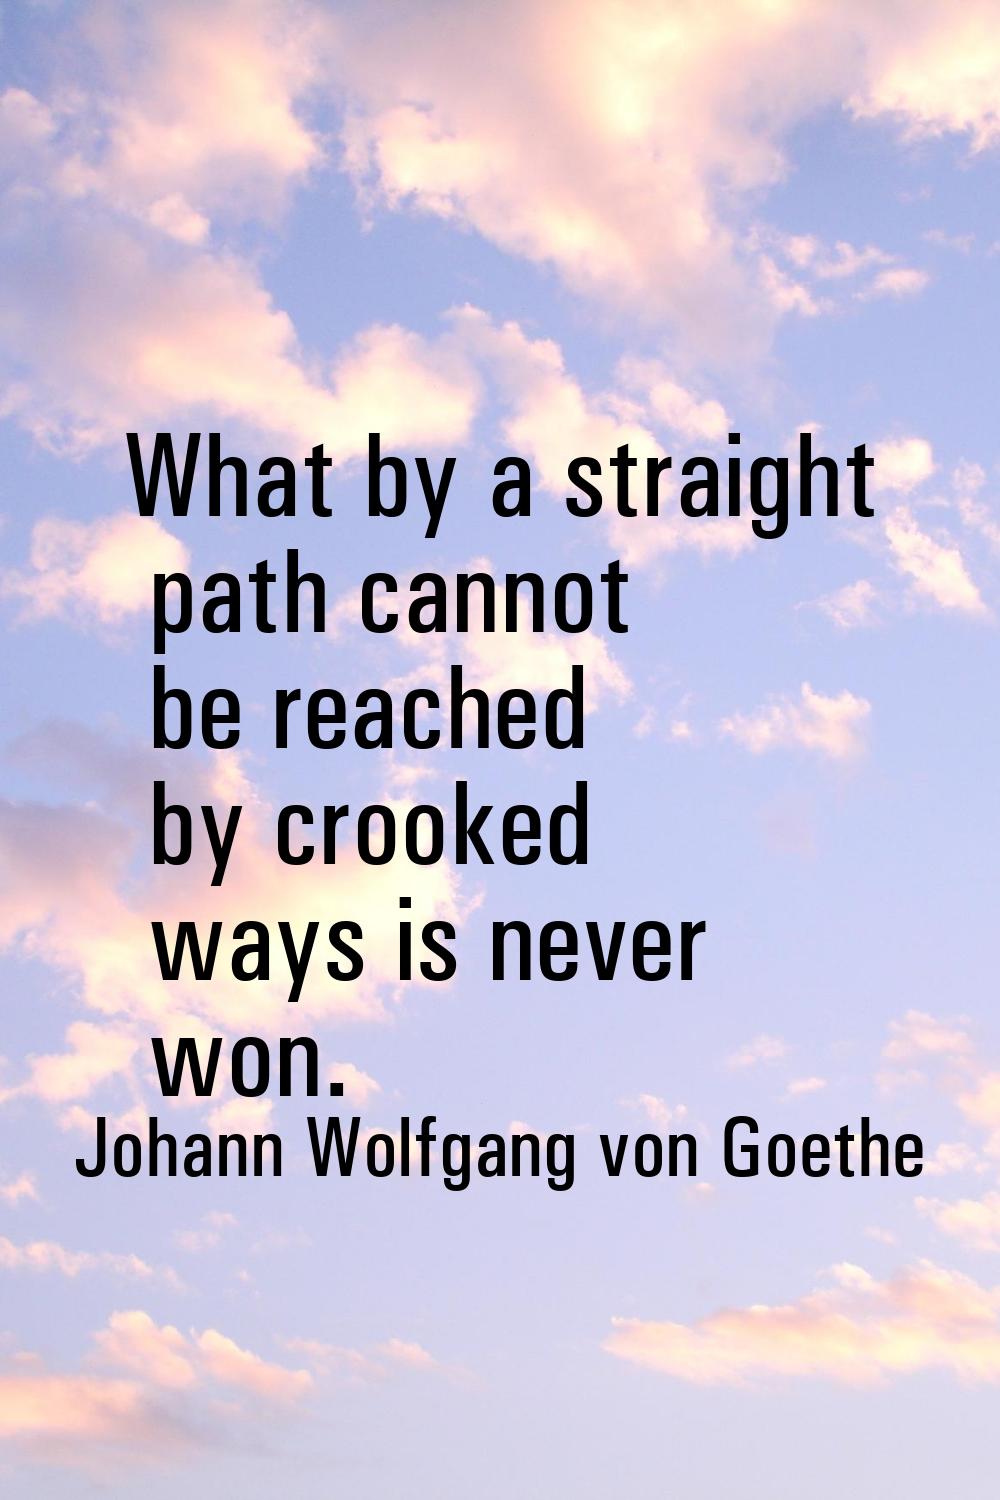 What by a straight path cannot be reached by crooked ways is never won.